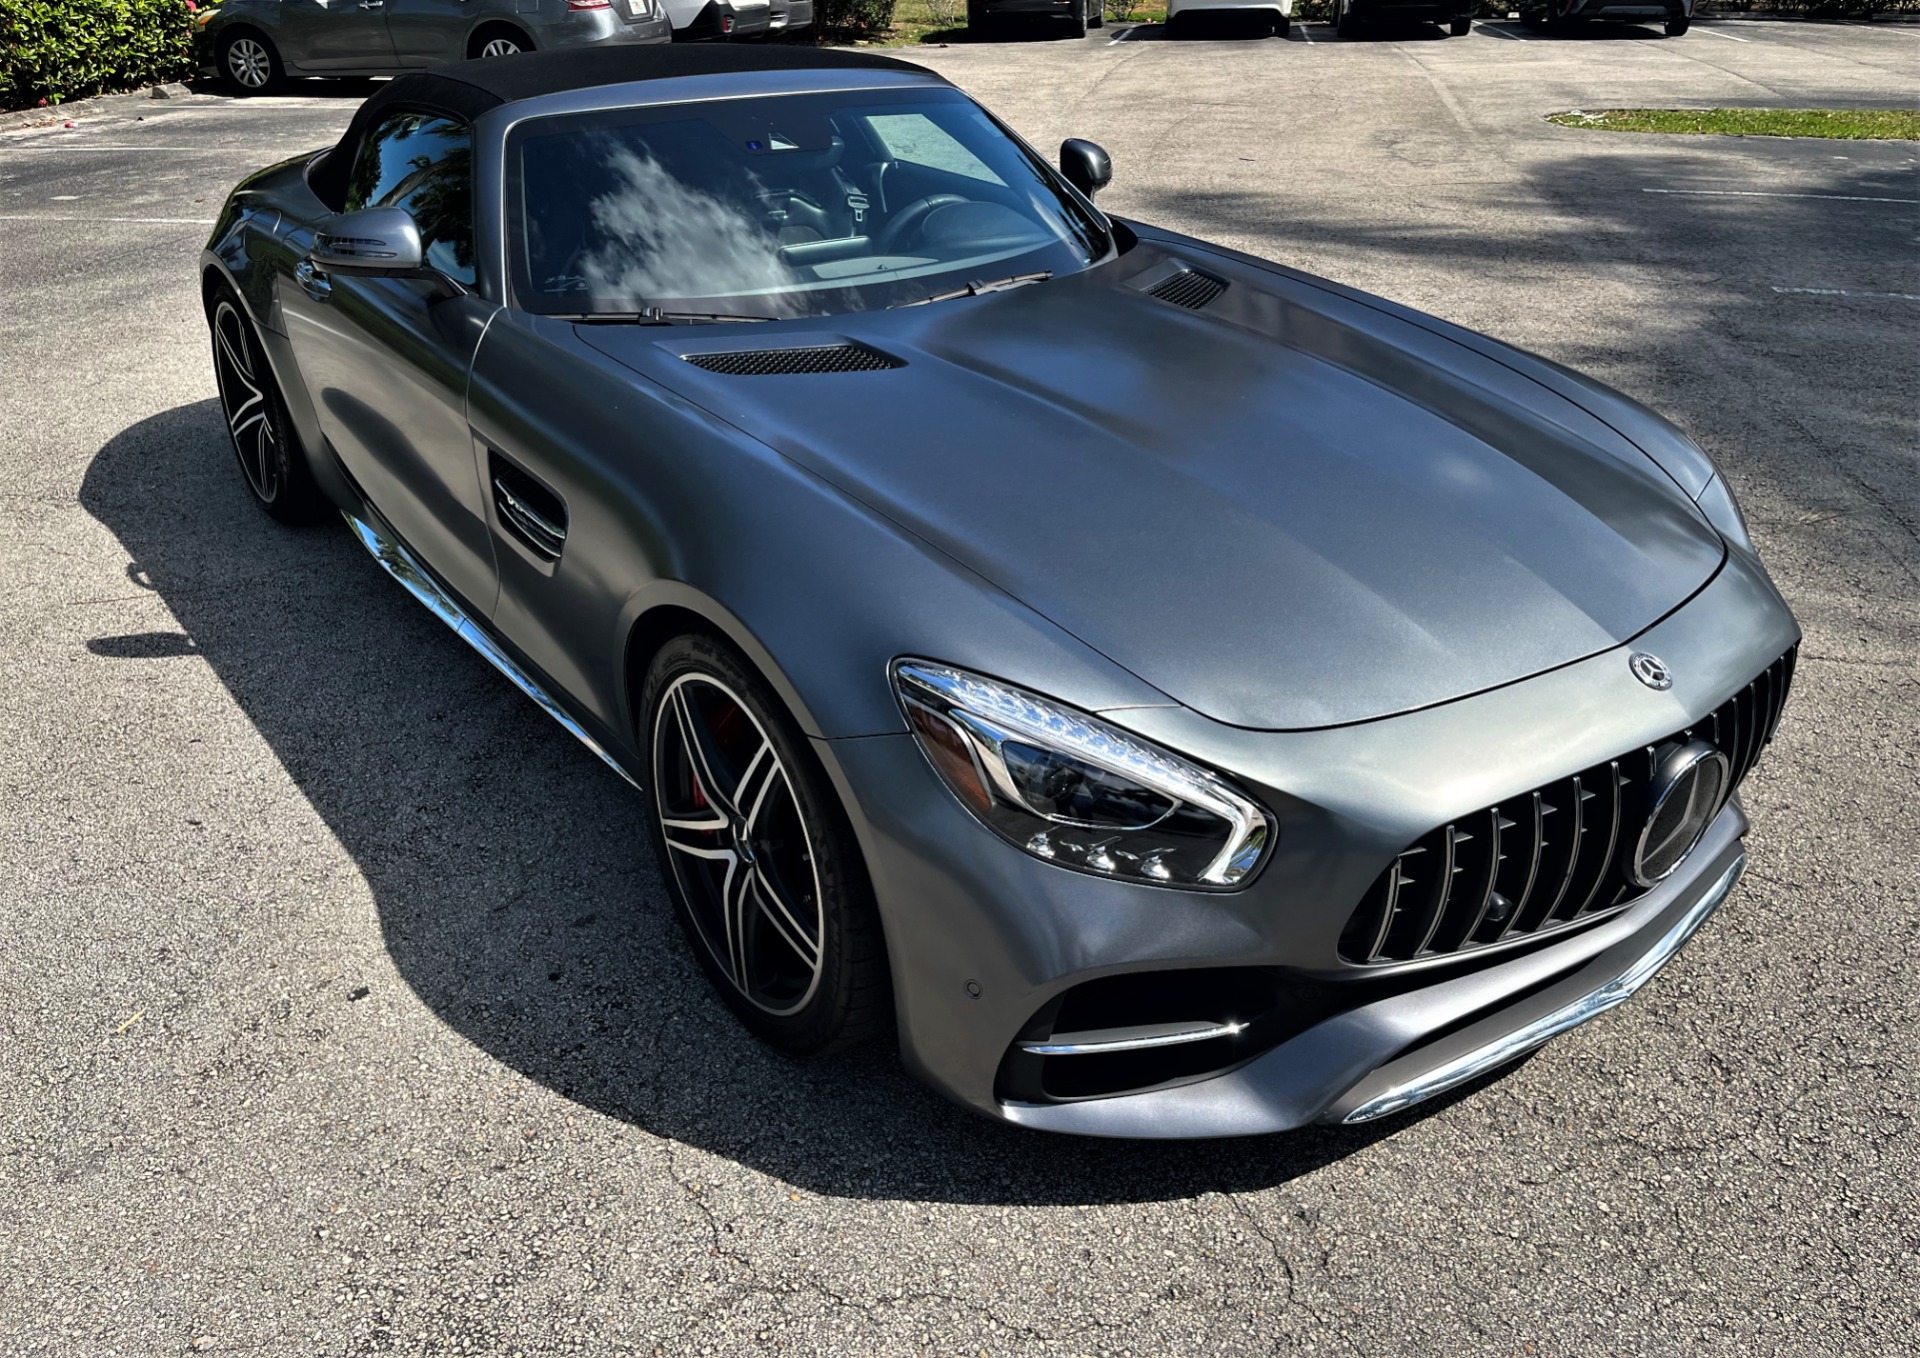 Used 2018 Mercedes-Benz AMG GT C for sale Sold at The Gables Sports Cars in Miami FL 33146 3